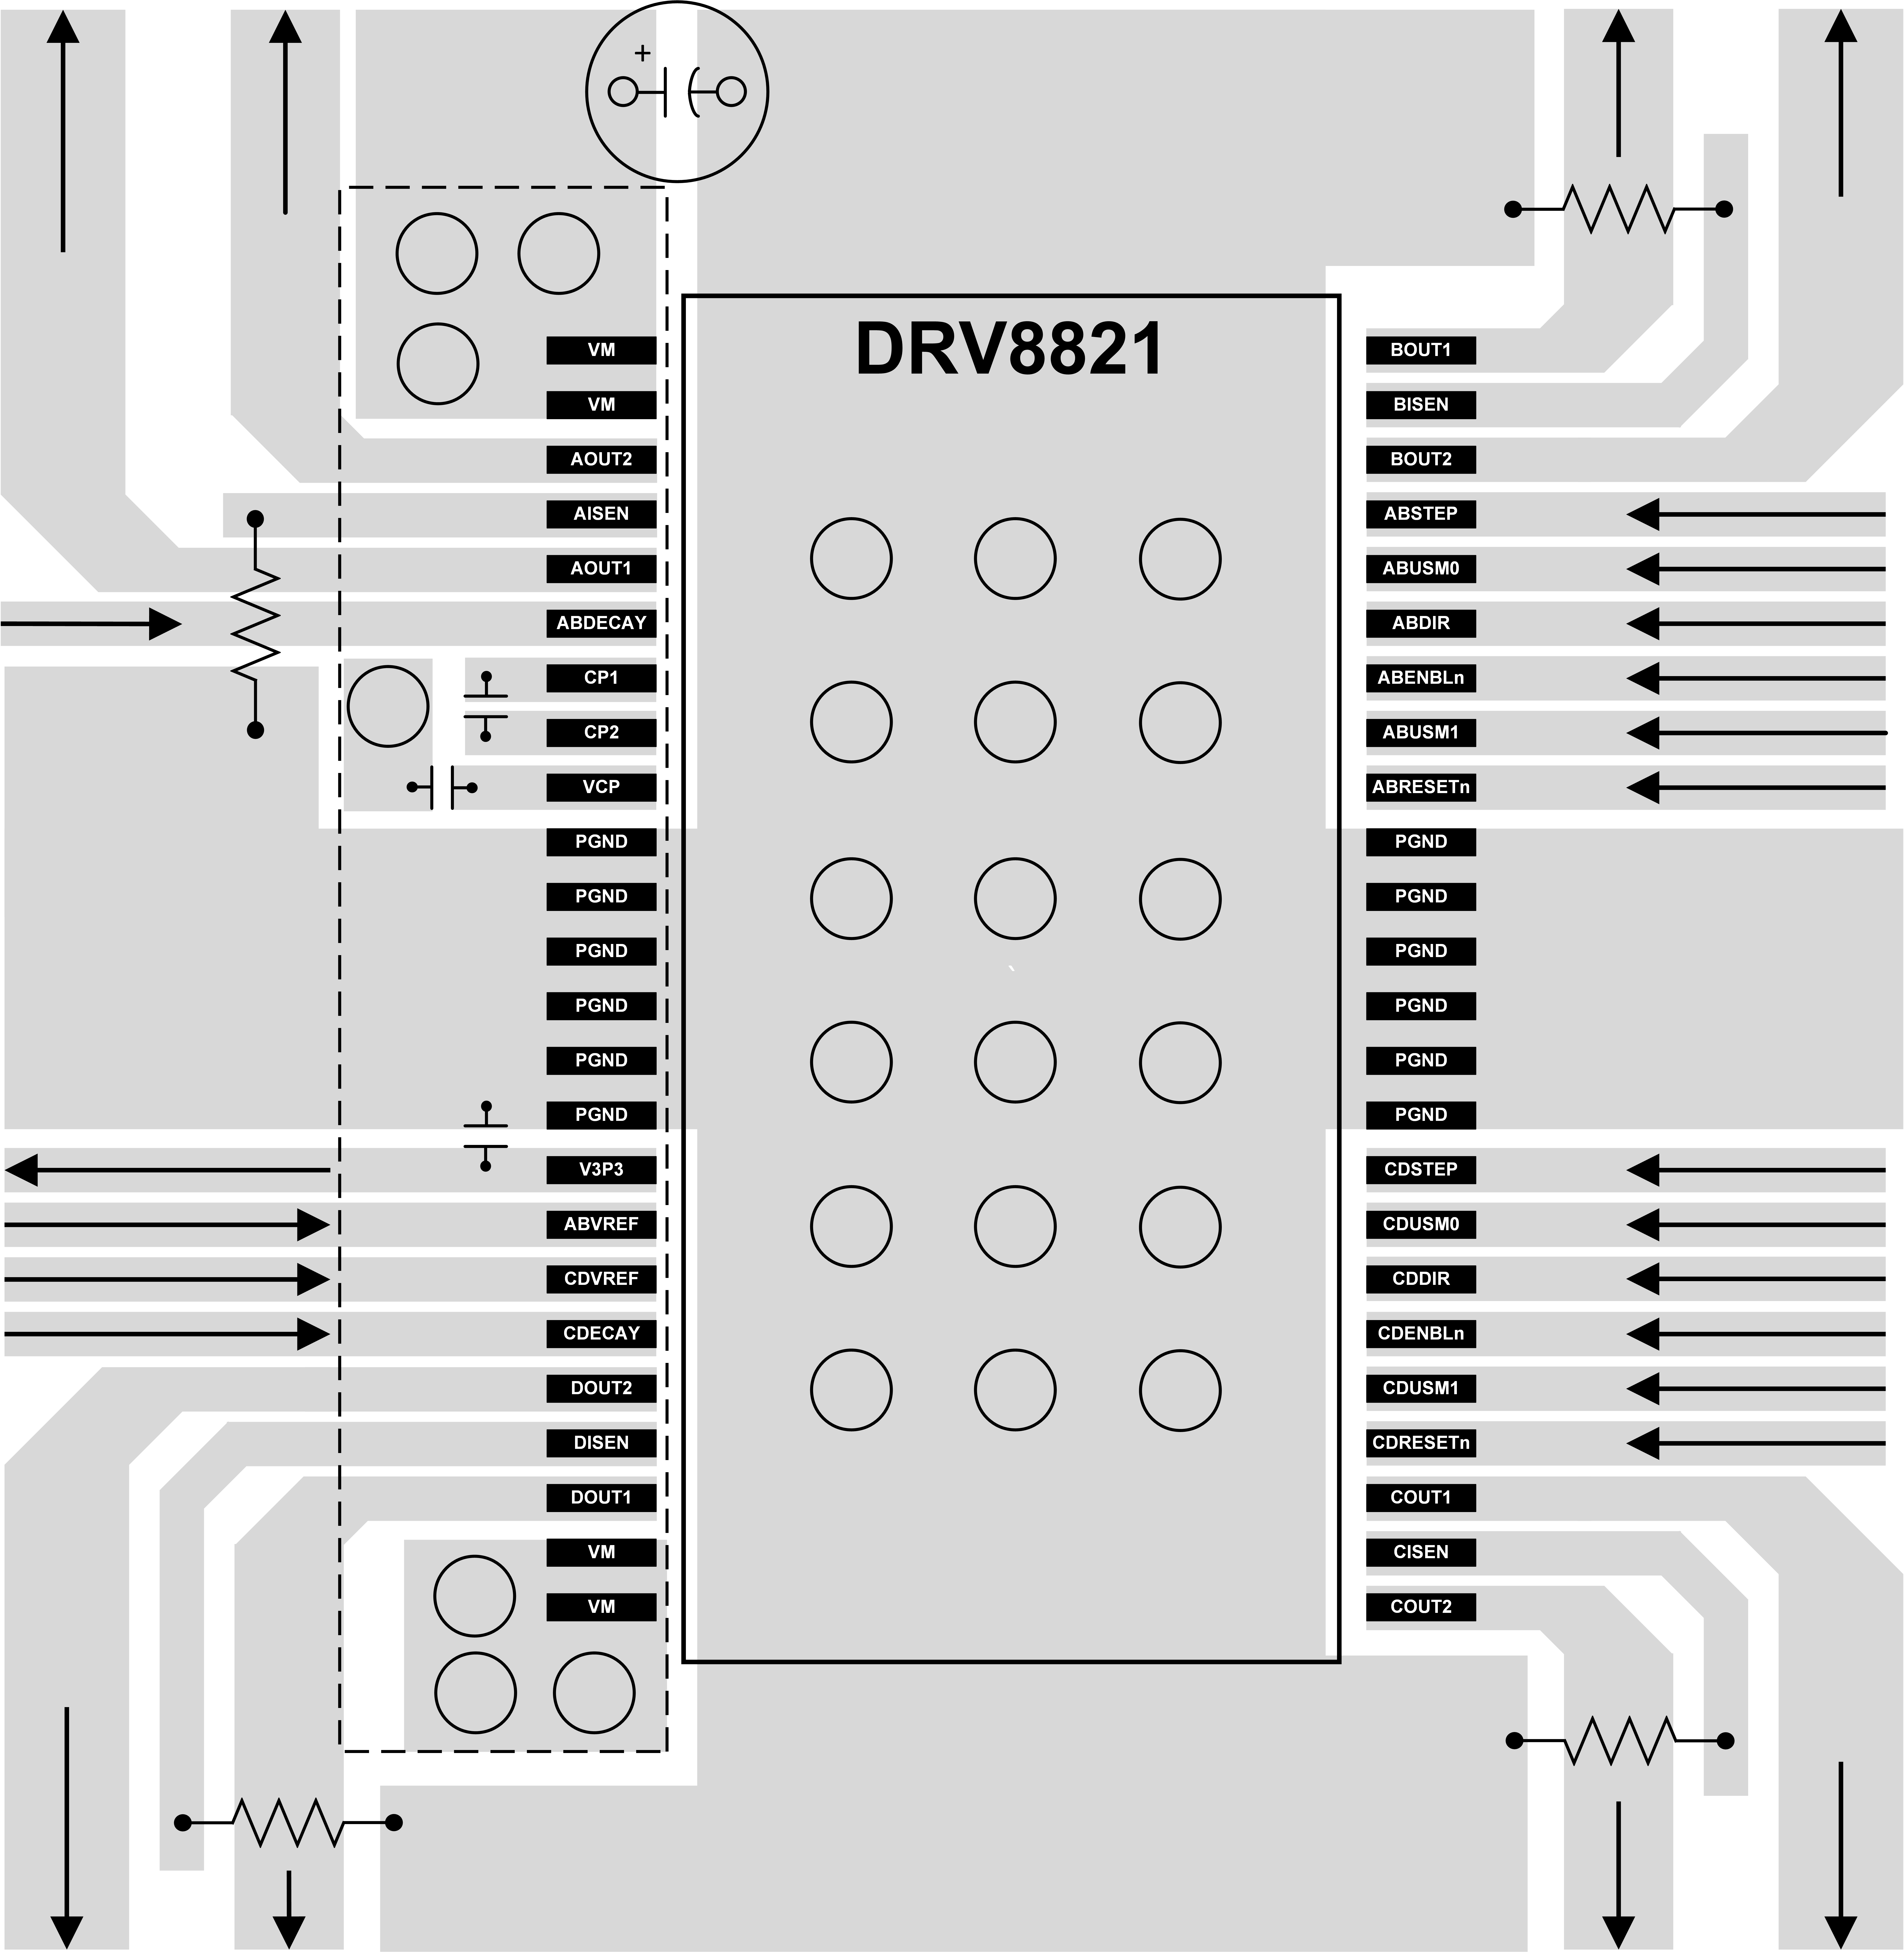 DRV8821 DRV8821_Typical_Layout.png